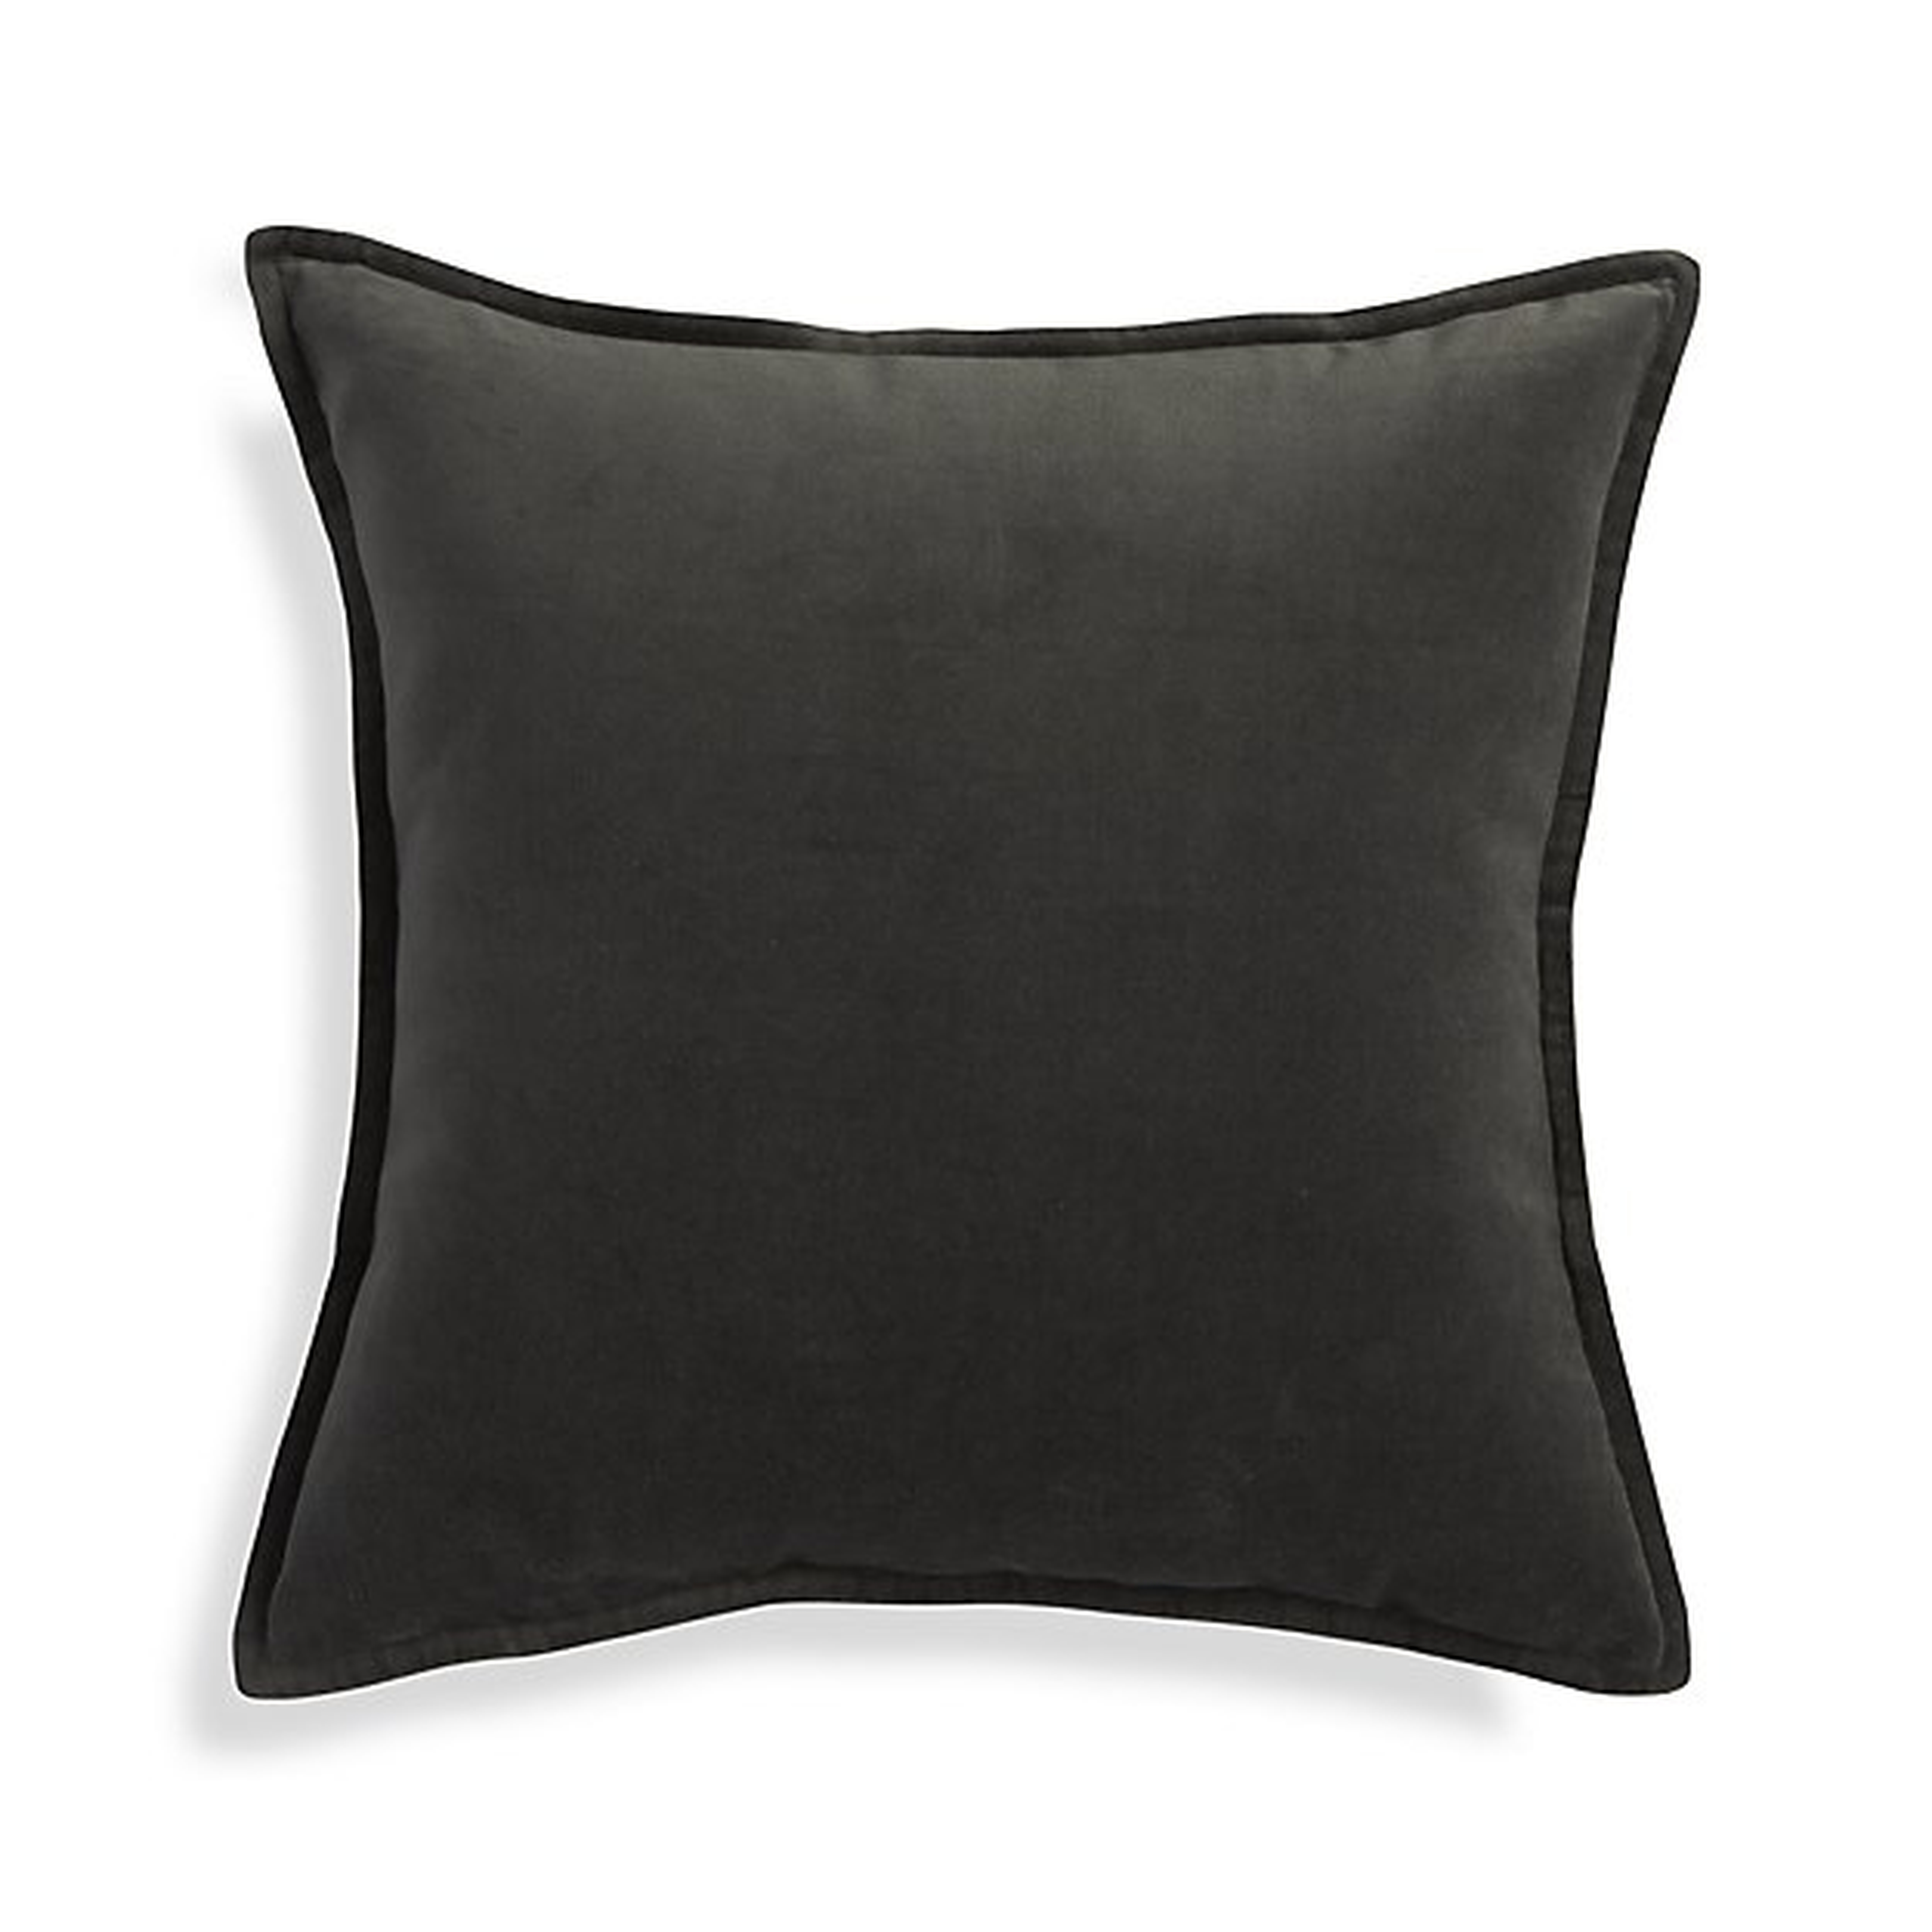 Brenner Grey 20" Velvet Pillow with Feather-Down Insert - Crate and Barrel